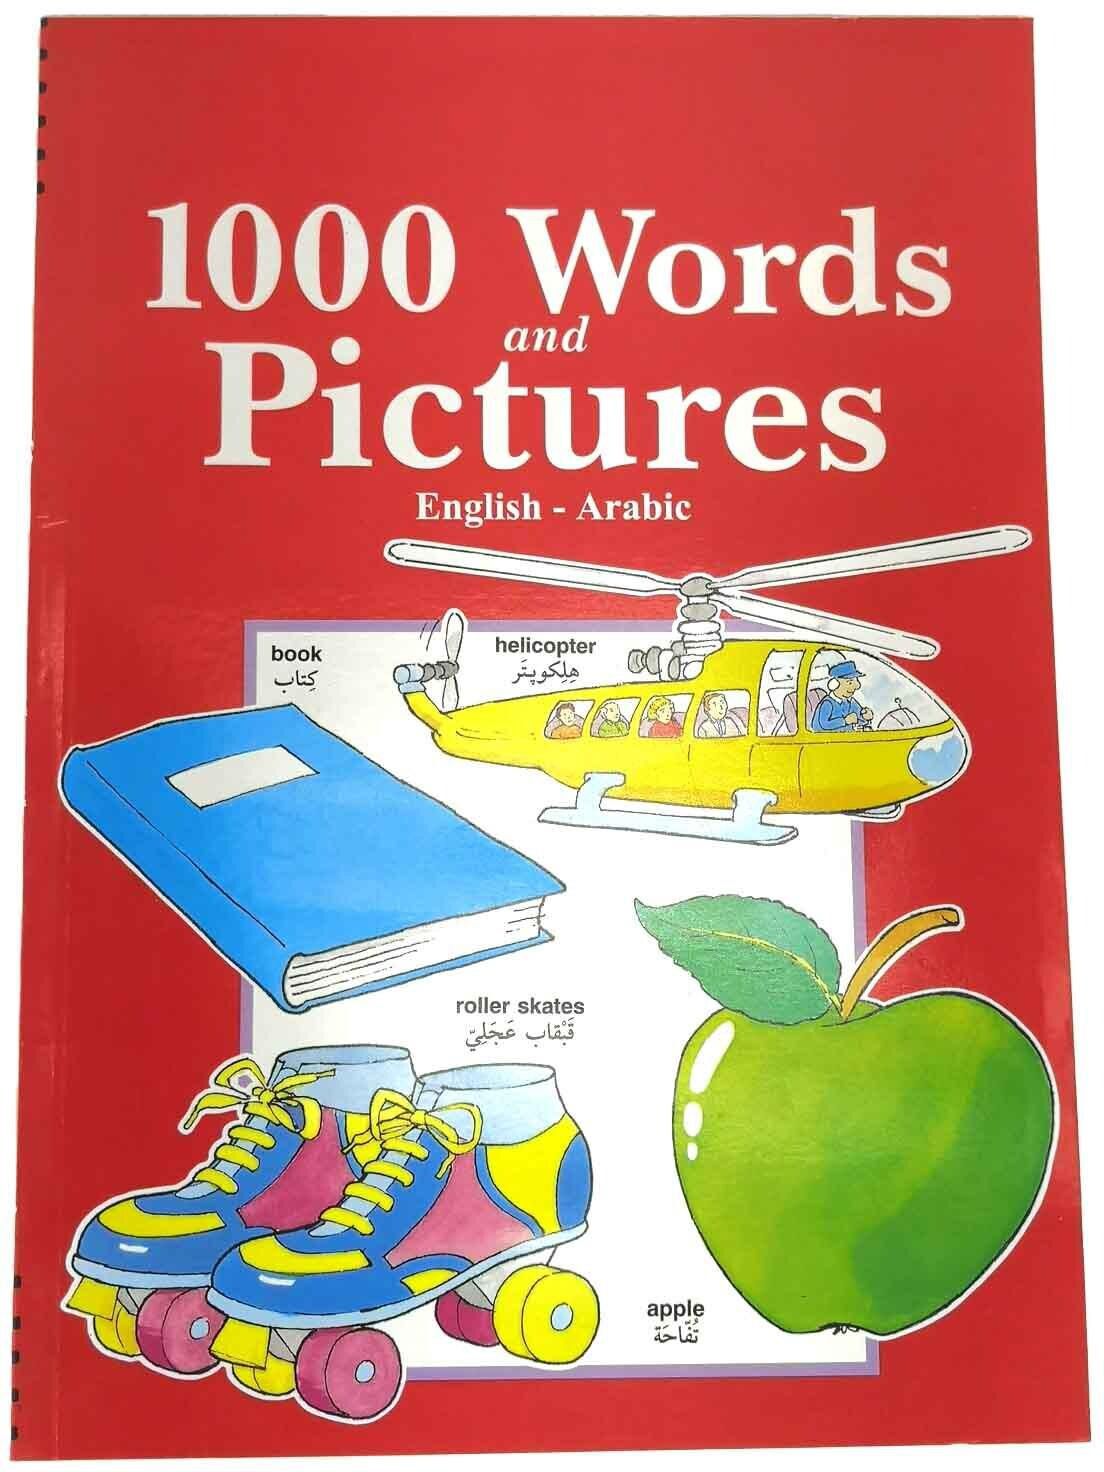 1000 Words and Pictures English-Arabic - Book